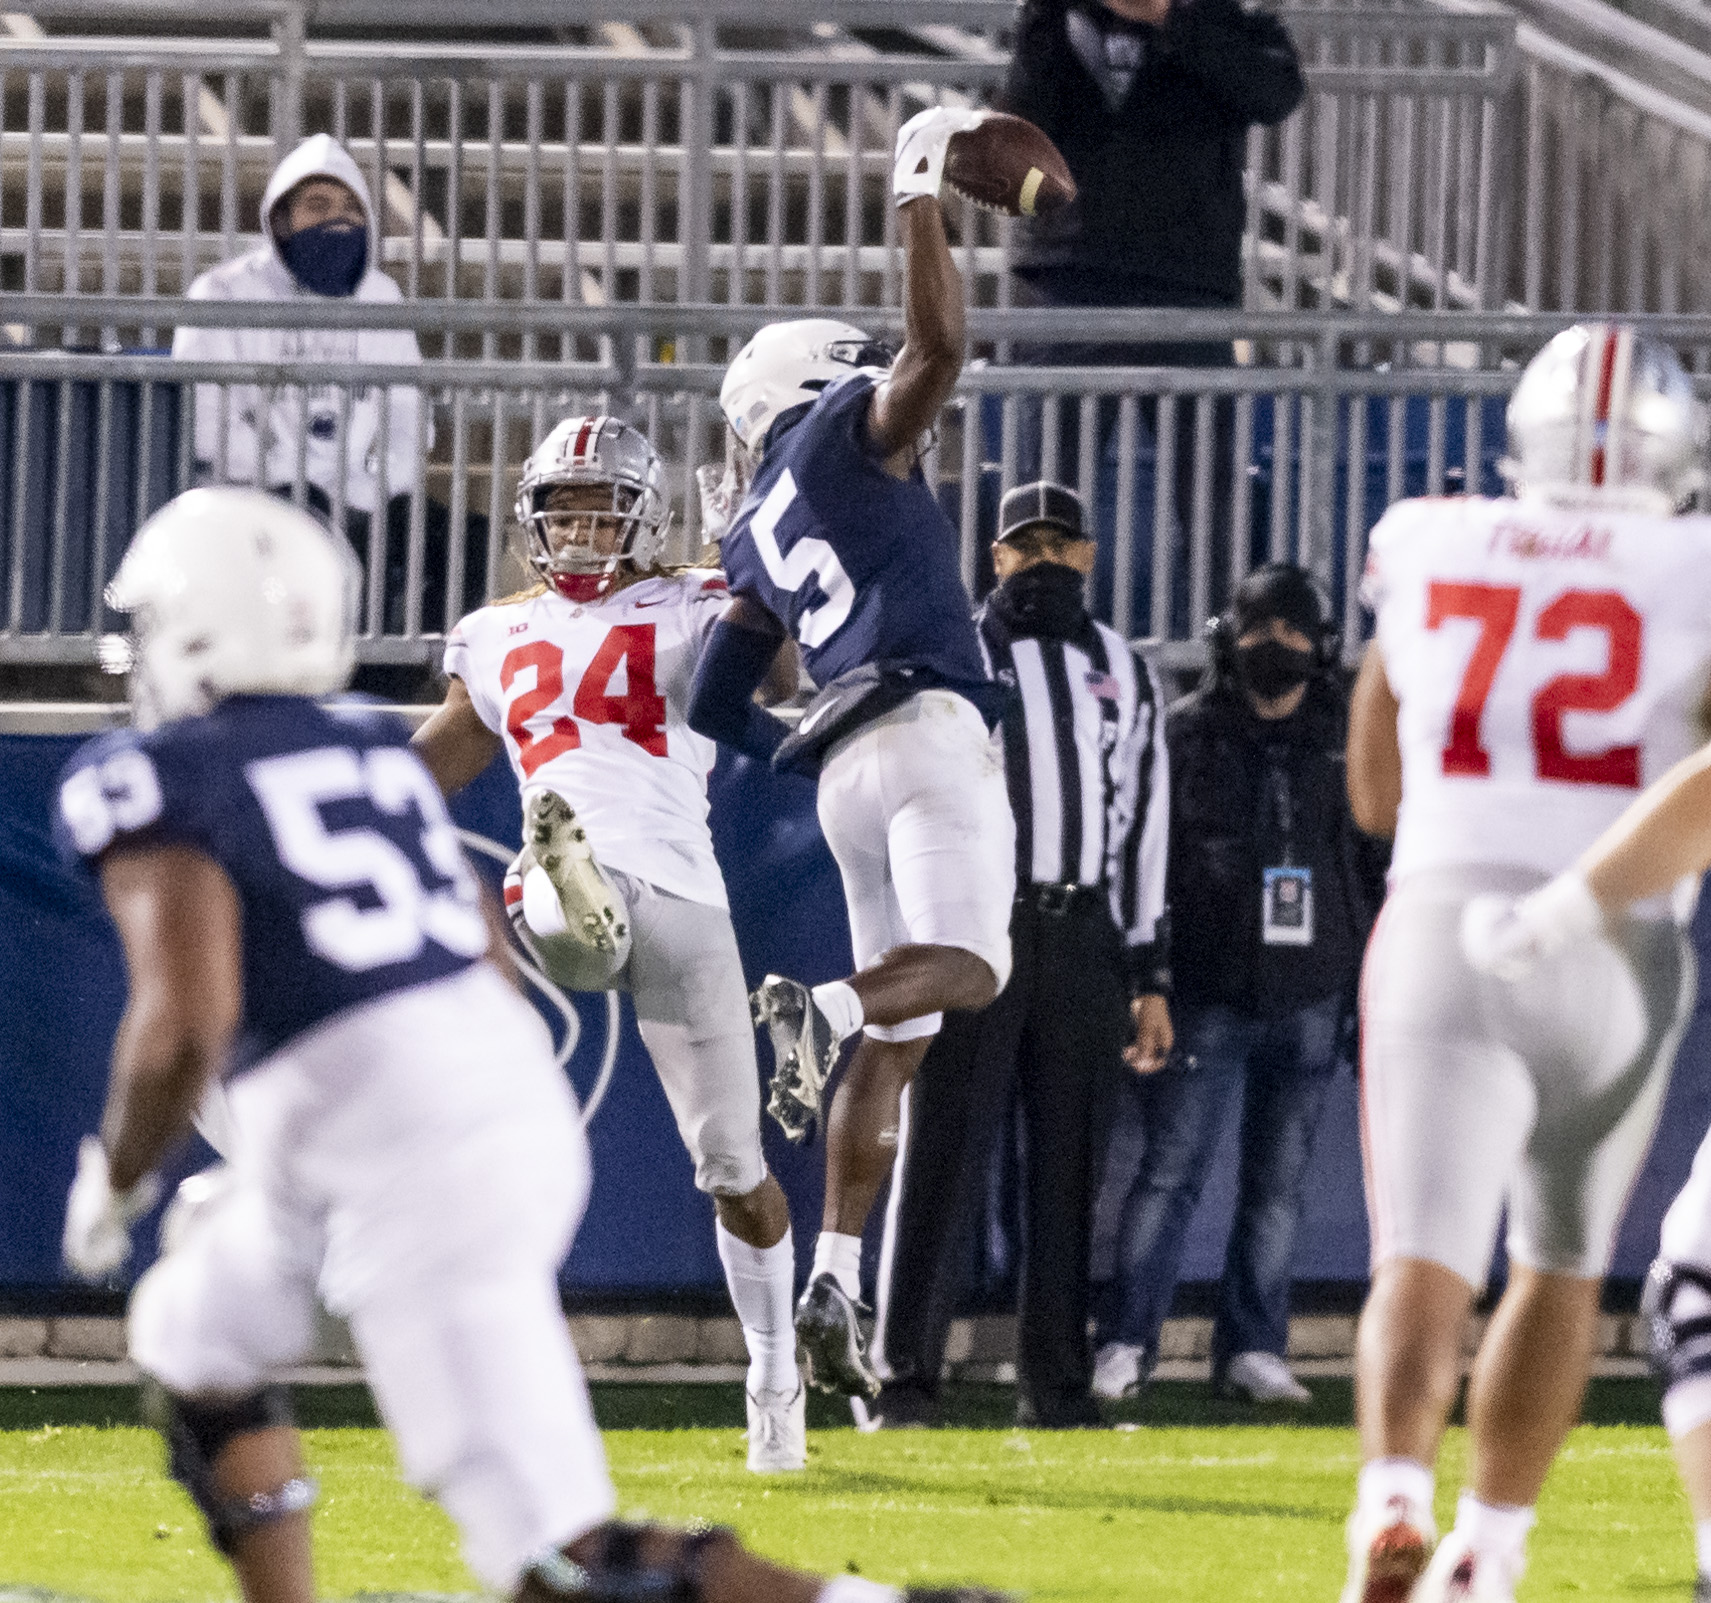 Jahan Dotson dazzles, Penn State defense faces issues: Ohio State